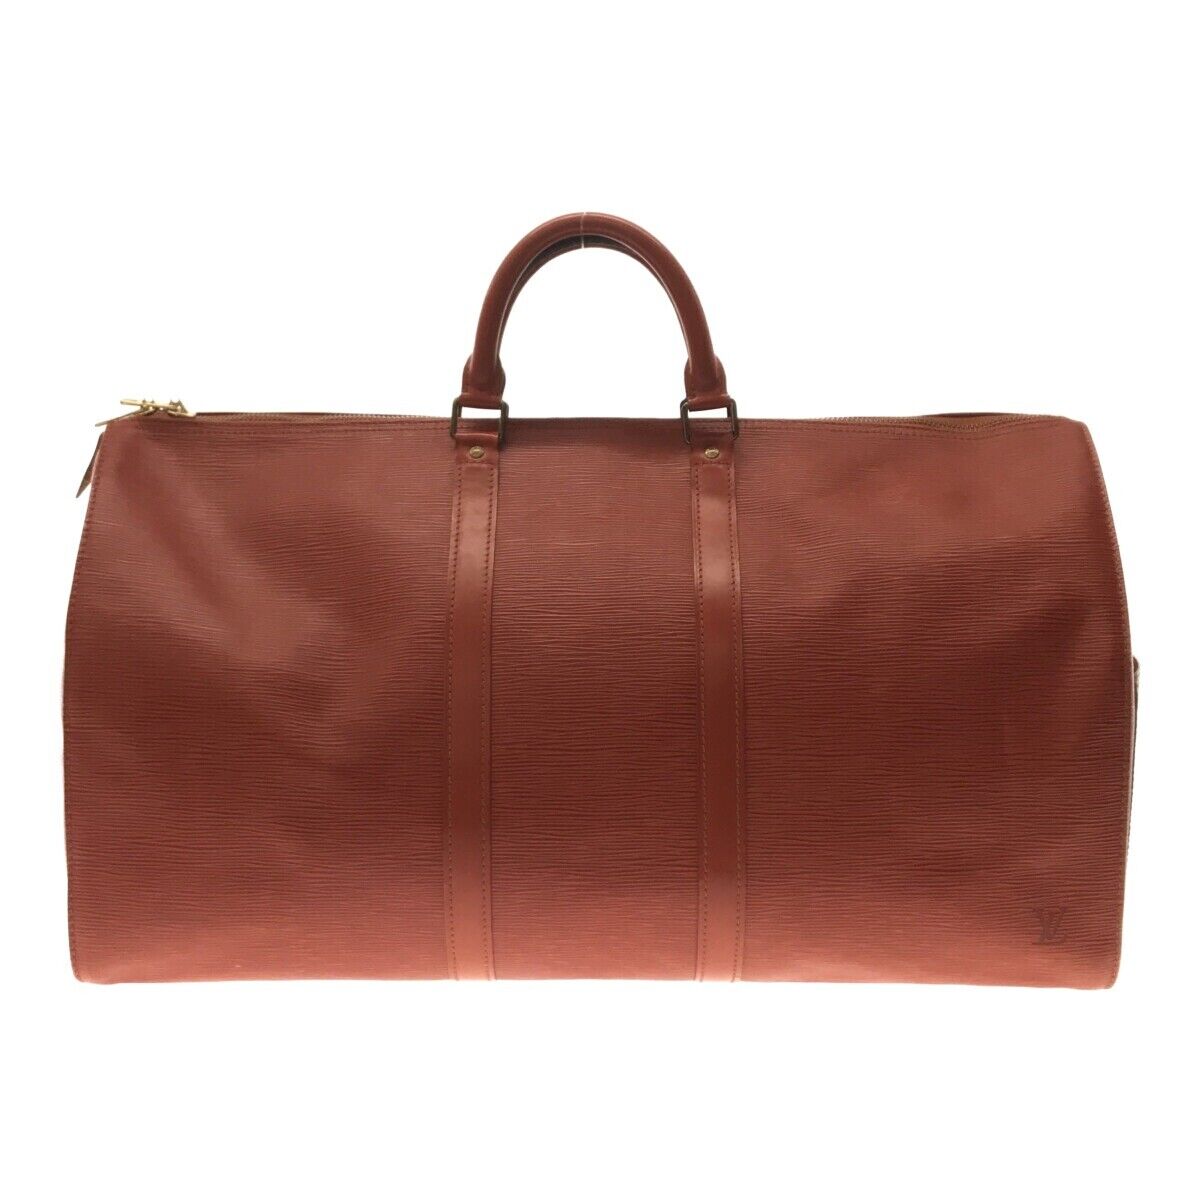 Shop for Louis Vuitton Red Epi Leather Keepall 55 cm Duffle Bag Luggage -  Shipped from USA